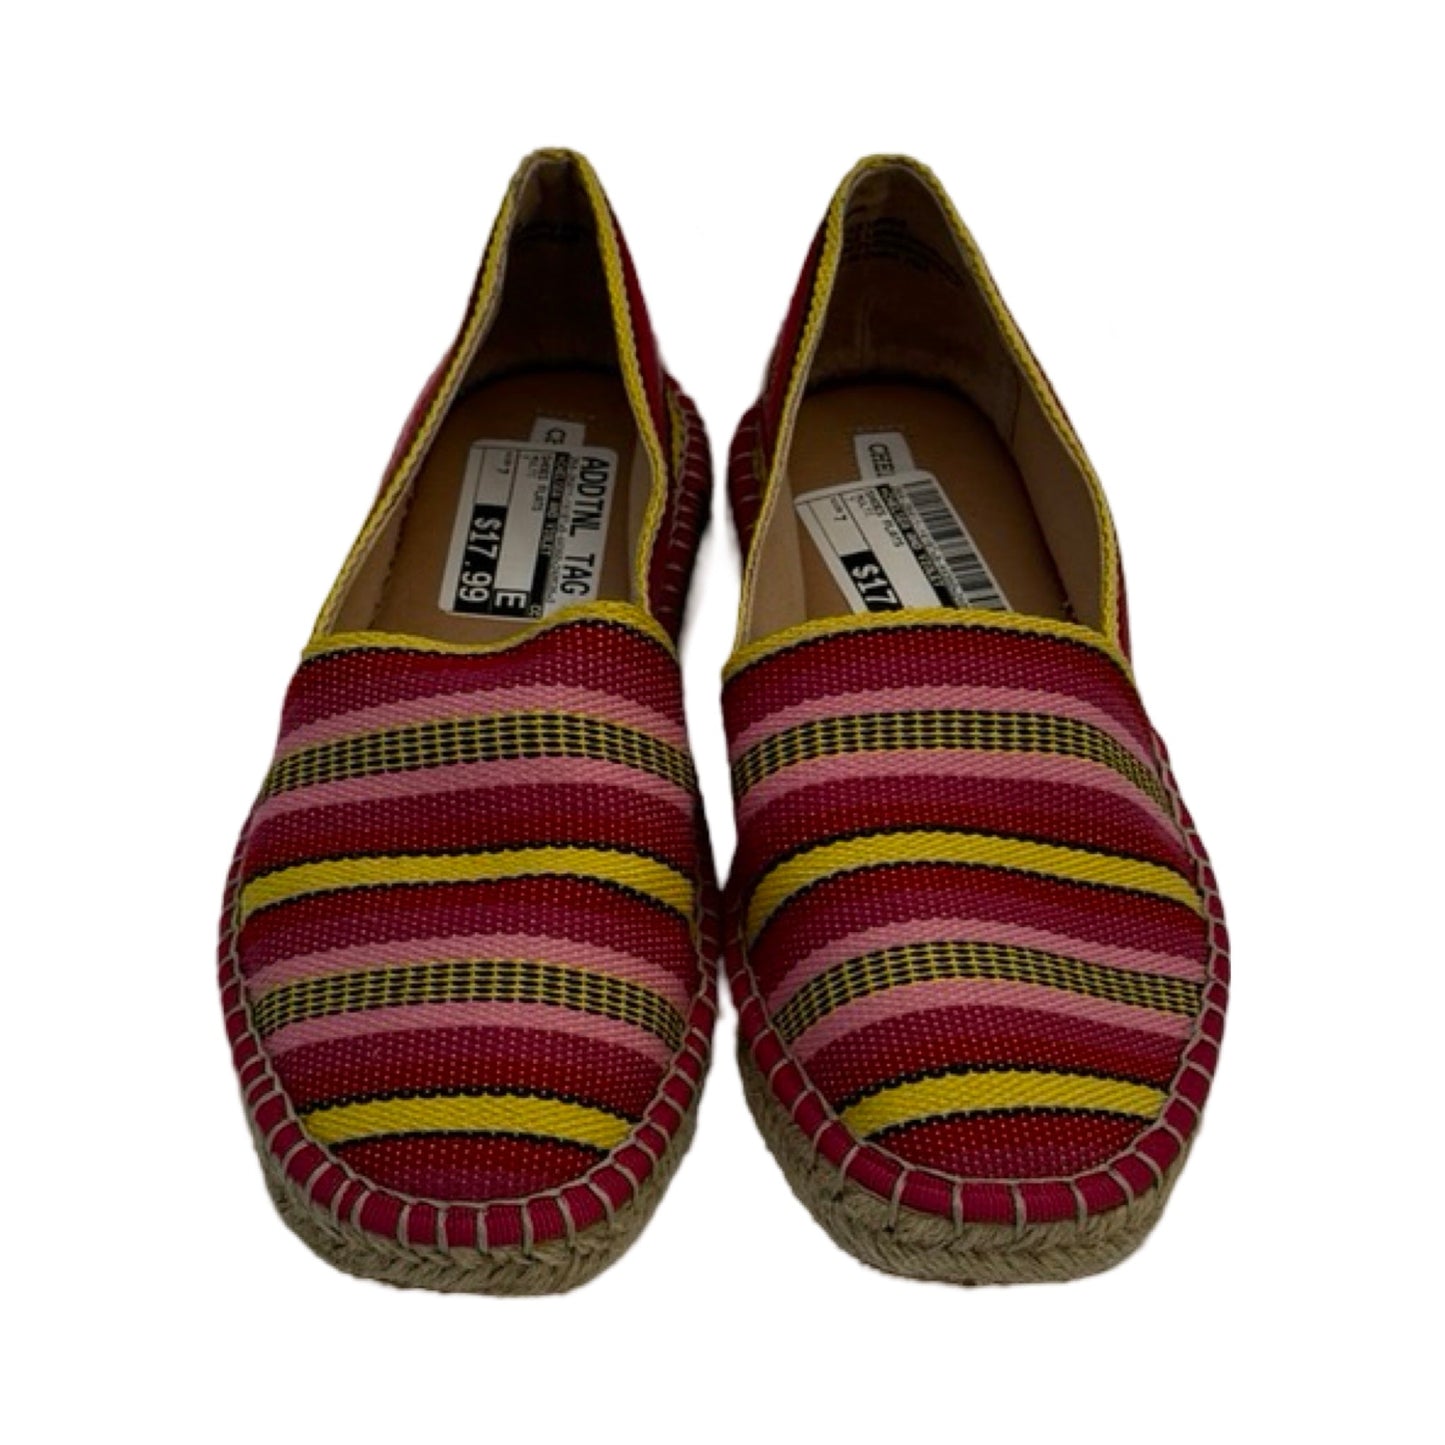 Multi-colored Shoes Flats Chelsea And Violet, Size 7